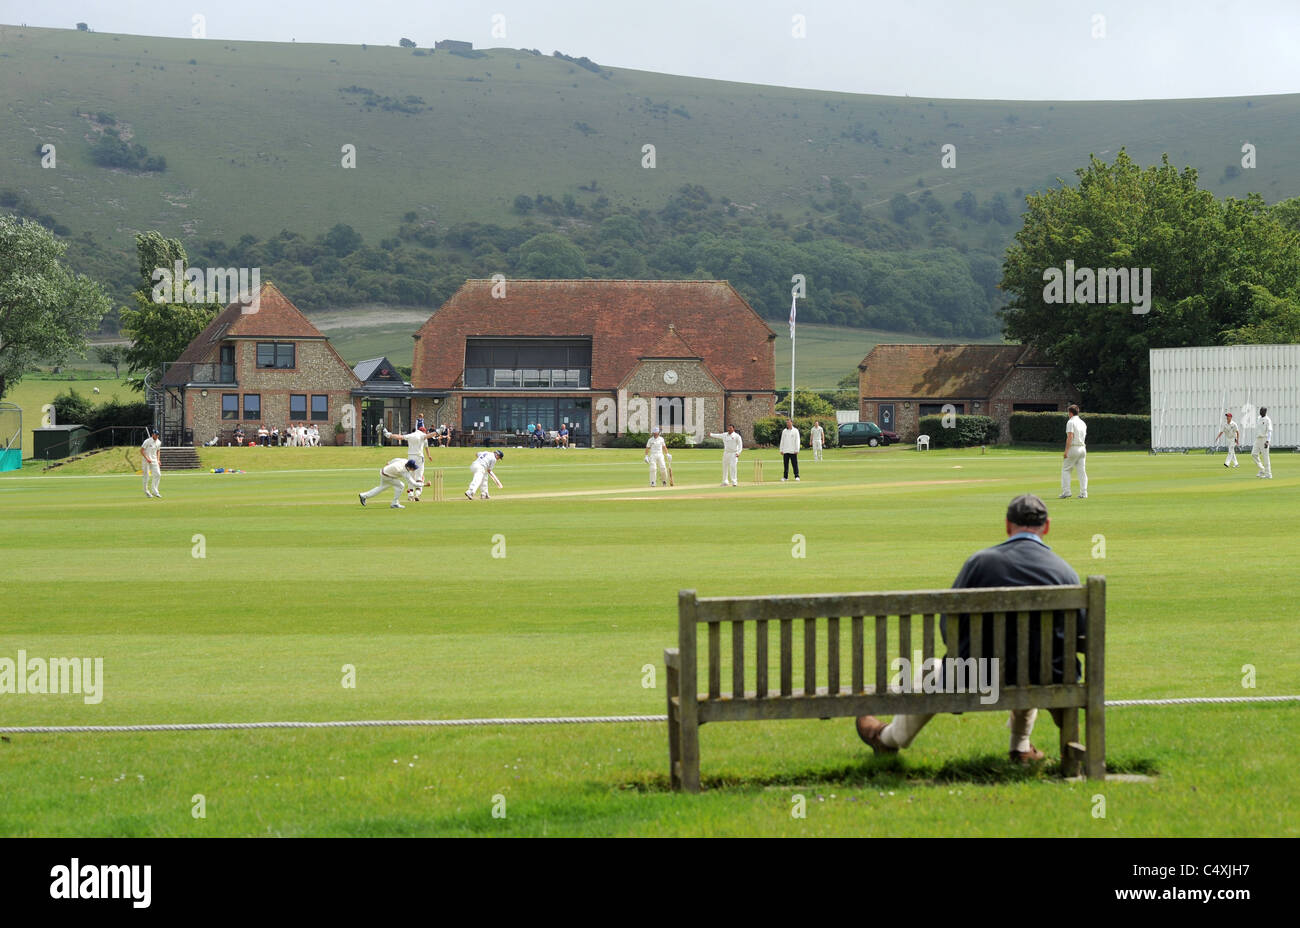 Preston Nomads play hosts to Horsham cricket team at their picturesque ground in Fulking Sussex which is overlooked by the Downs Stock Photo